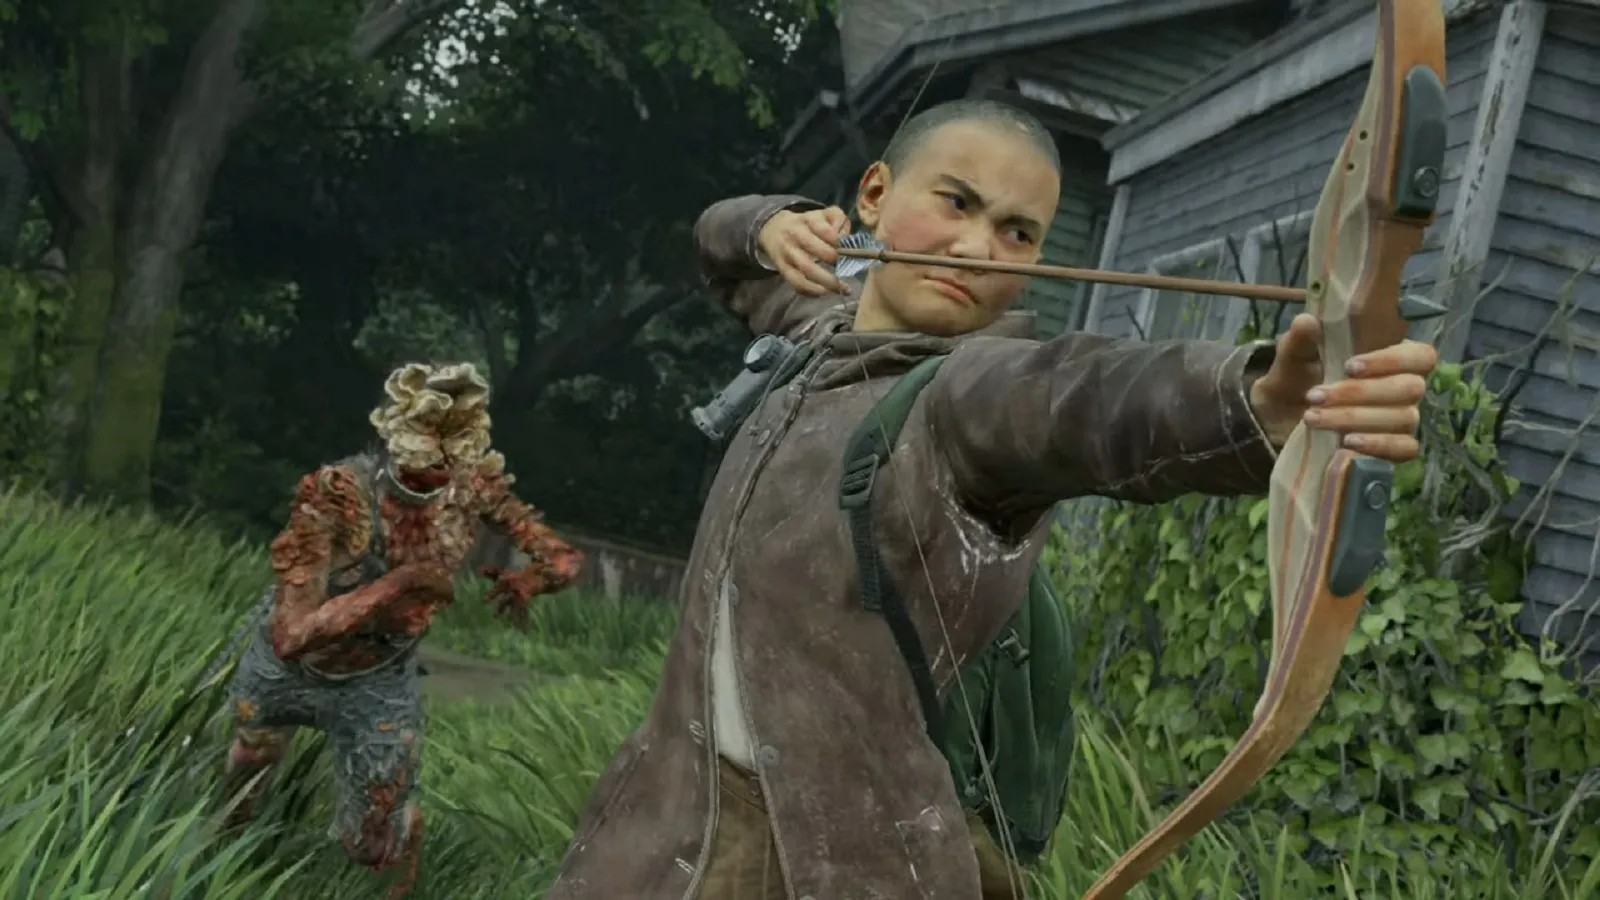 The Last of Us Part 2 Remastered Lev aiming bow and arrow as clicker comes from behind